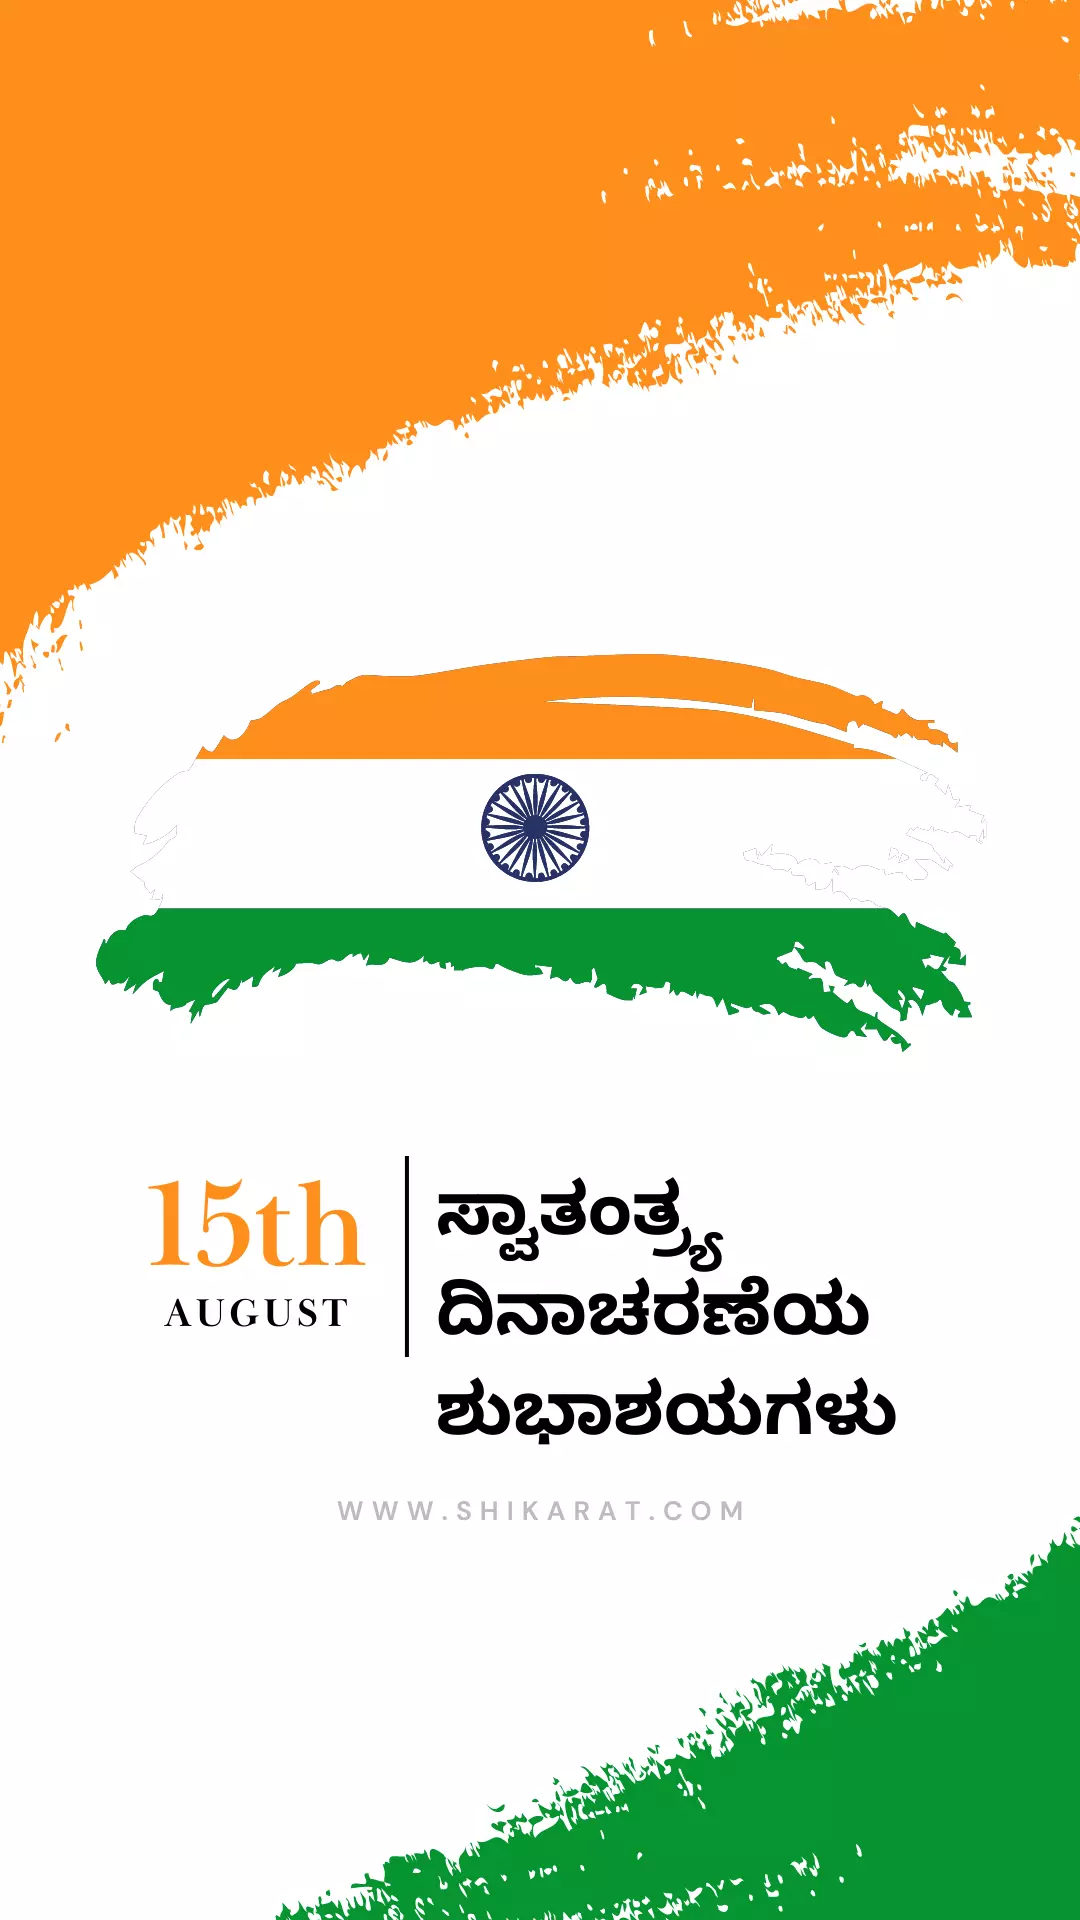 Independence Day wishes in Kannada